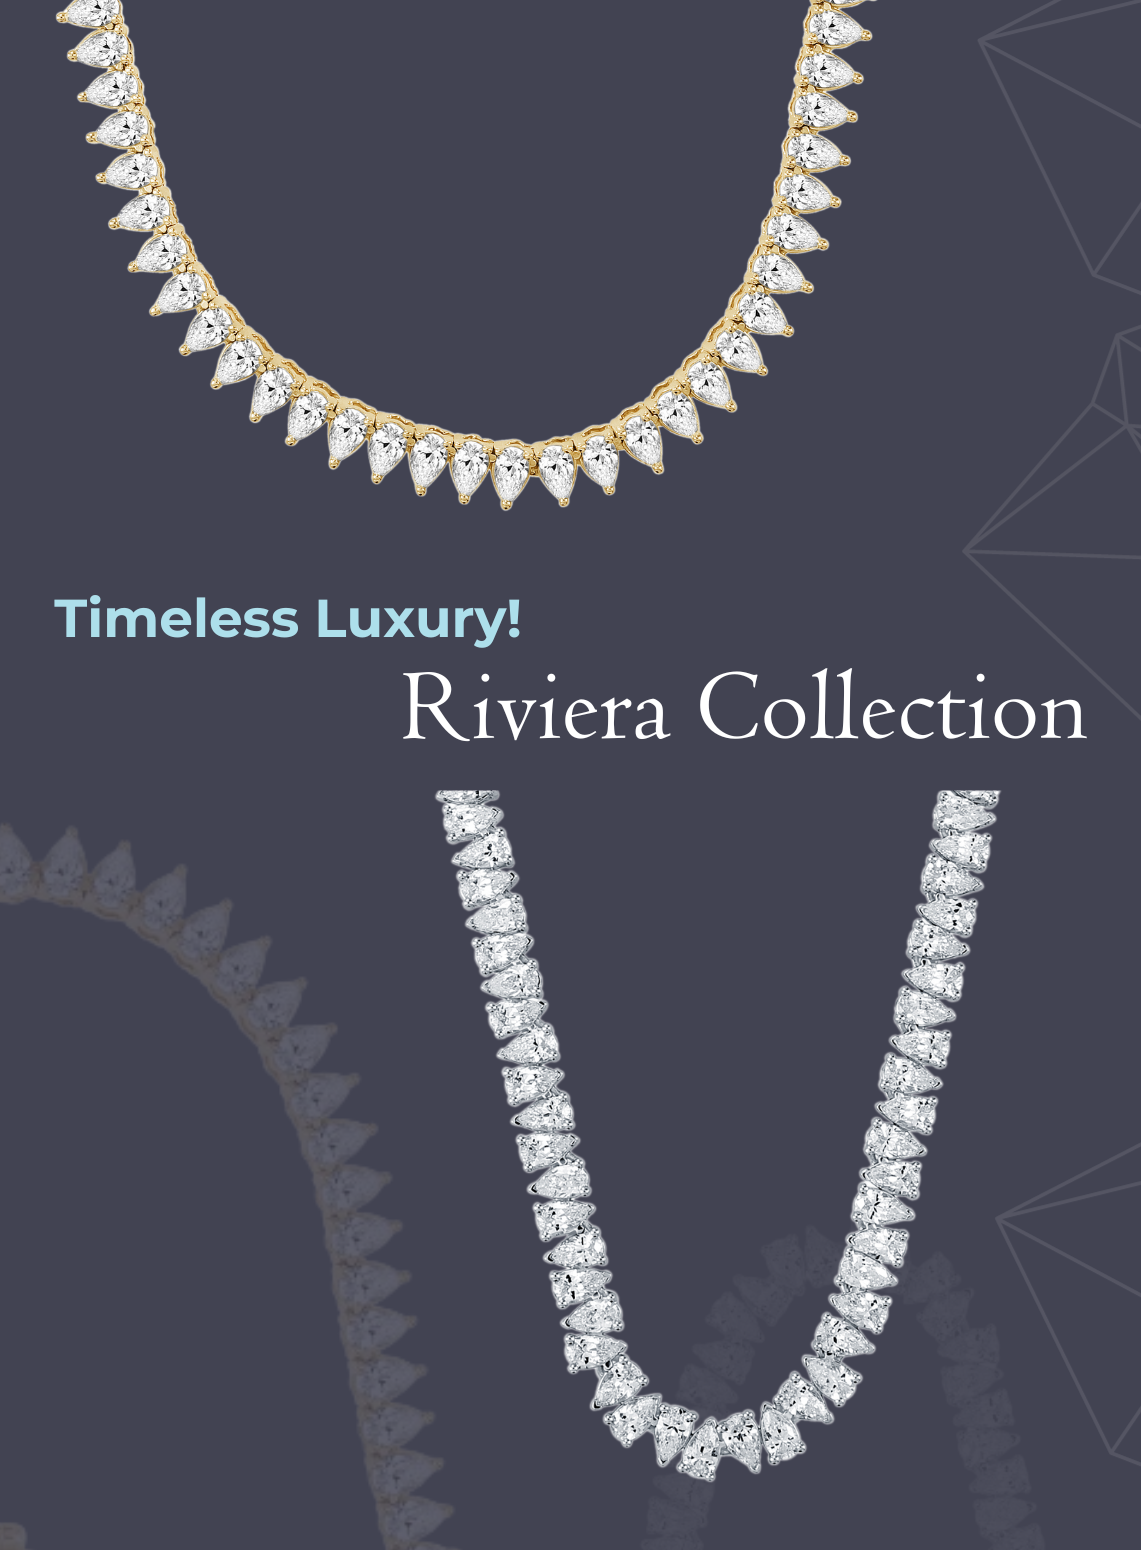 Riviera Collection